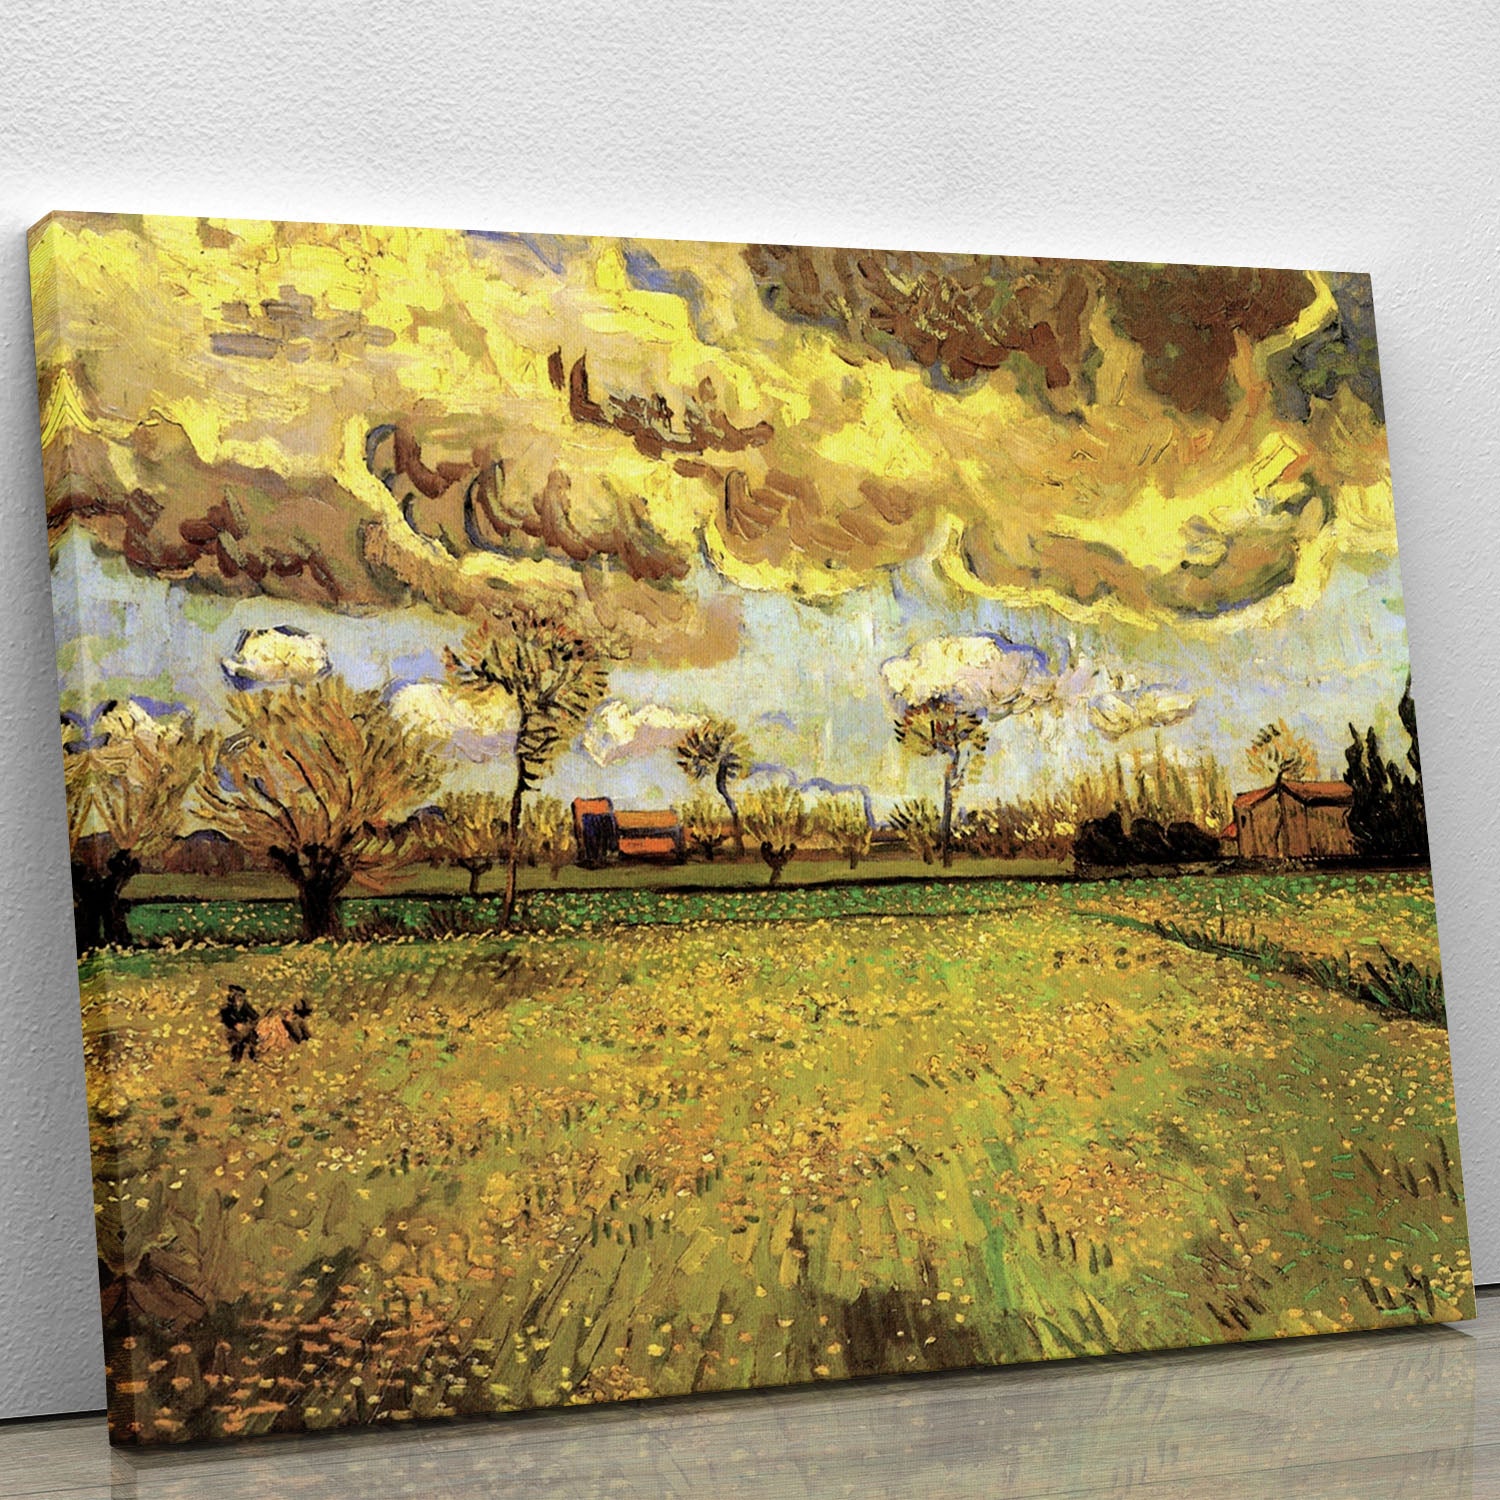 Landscape Under a Stormy Sky by Van Gogh Canvas Print or Poster - Canvas Art Rocks - 1